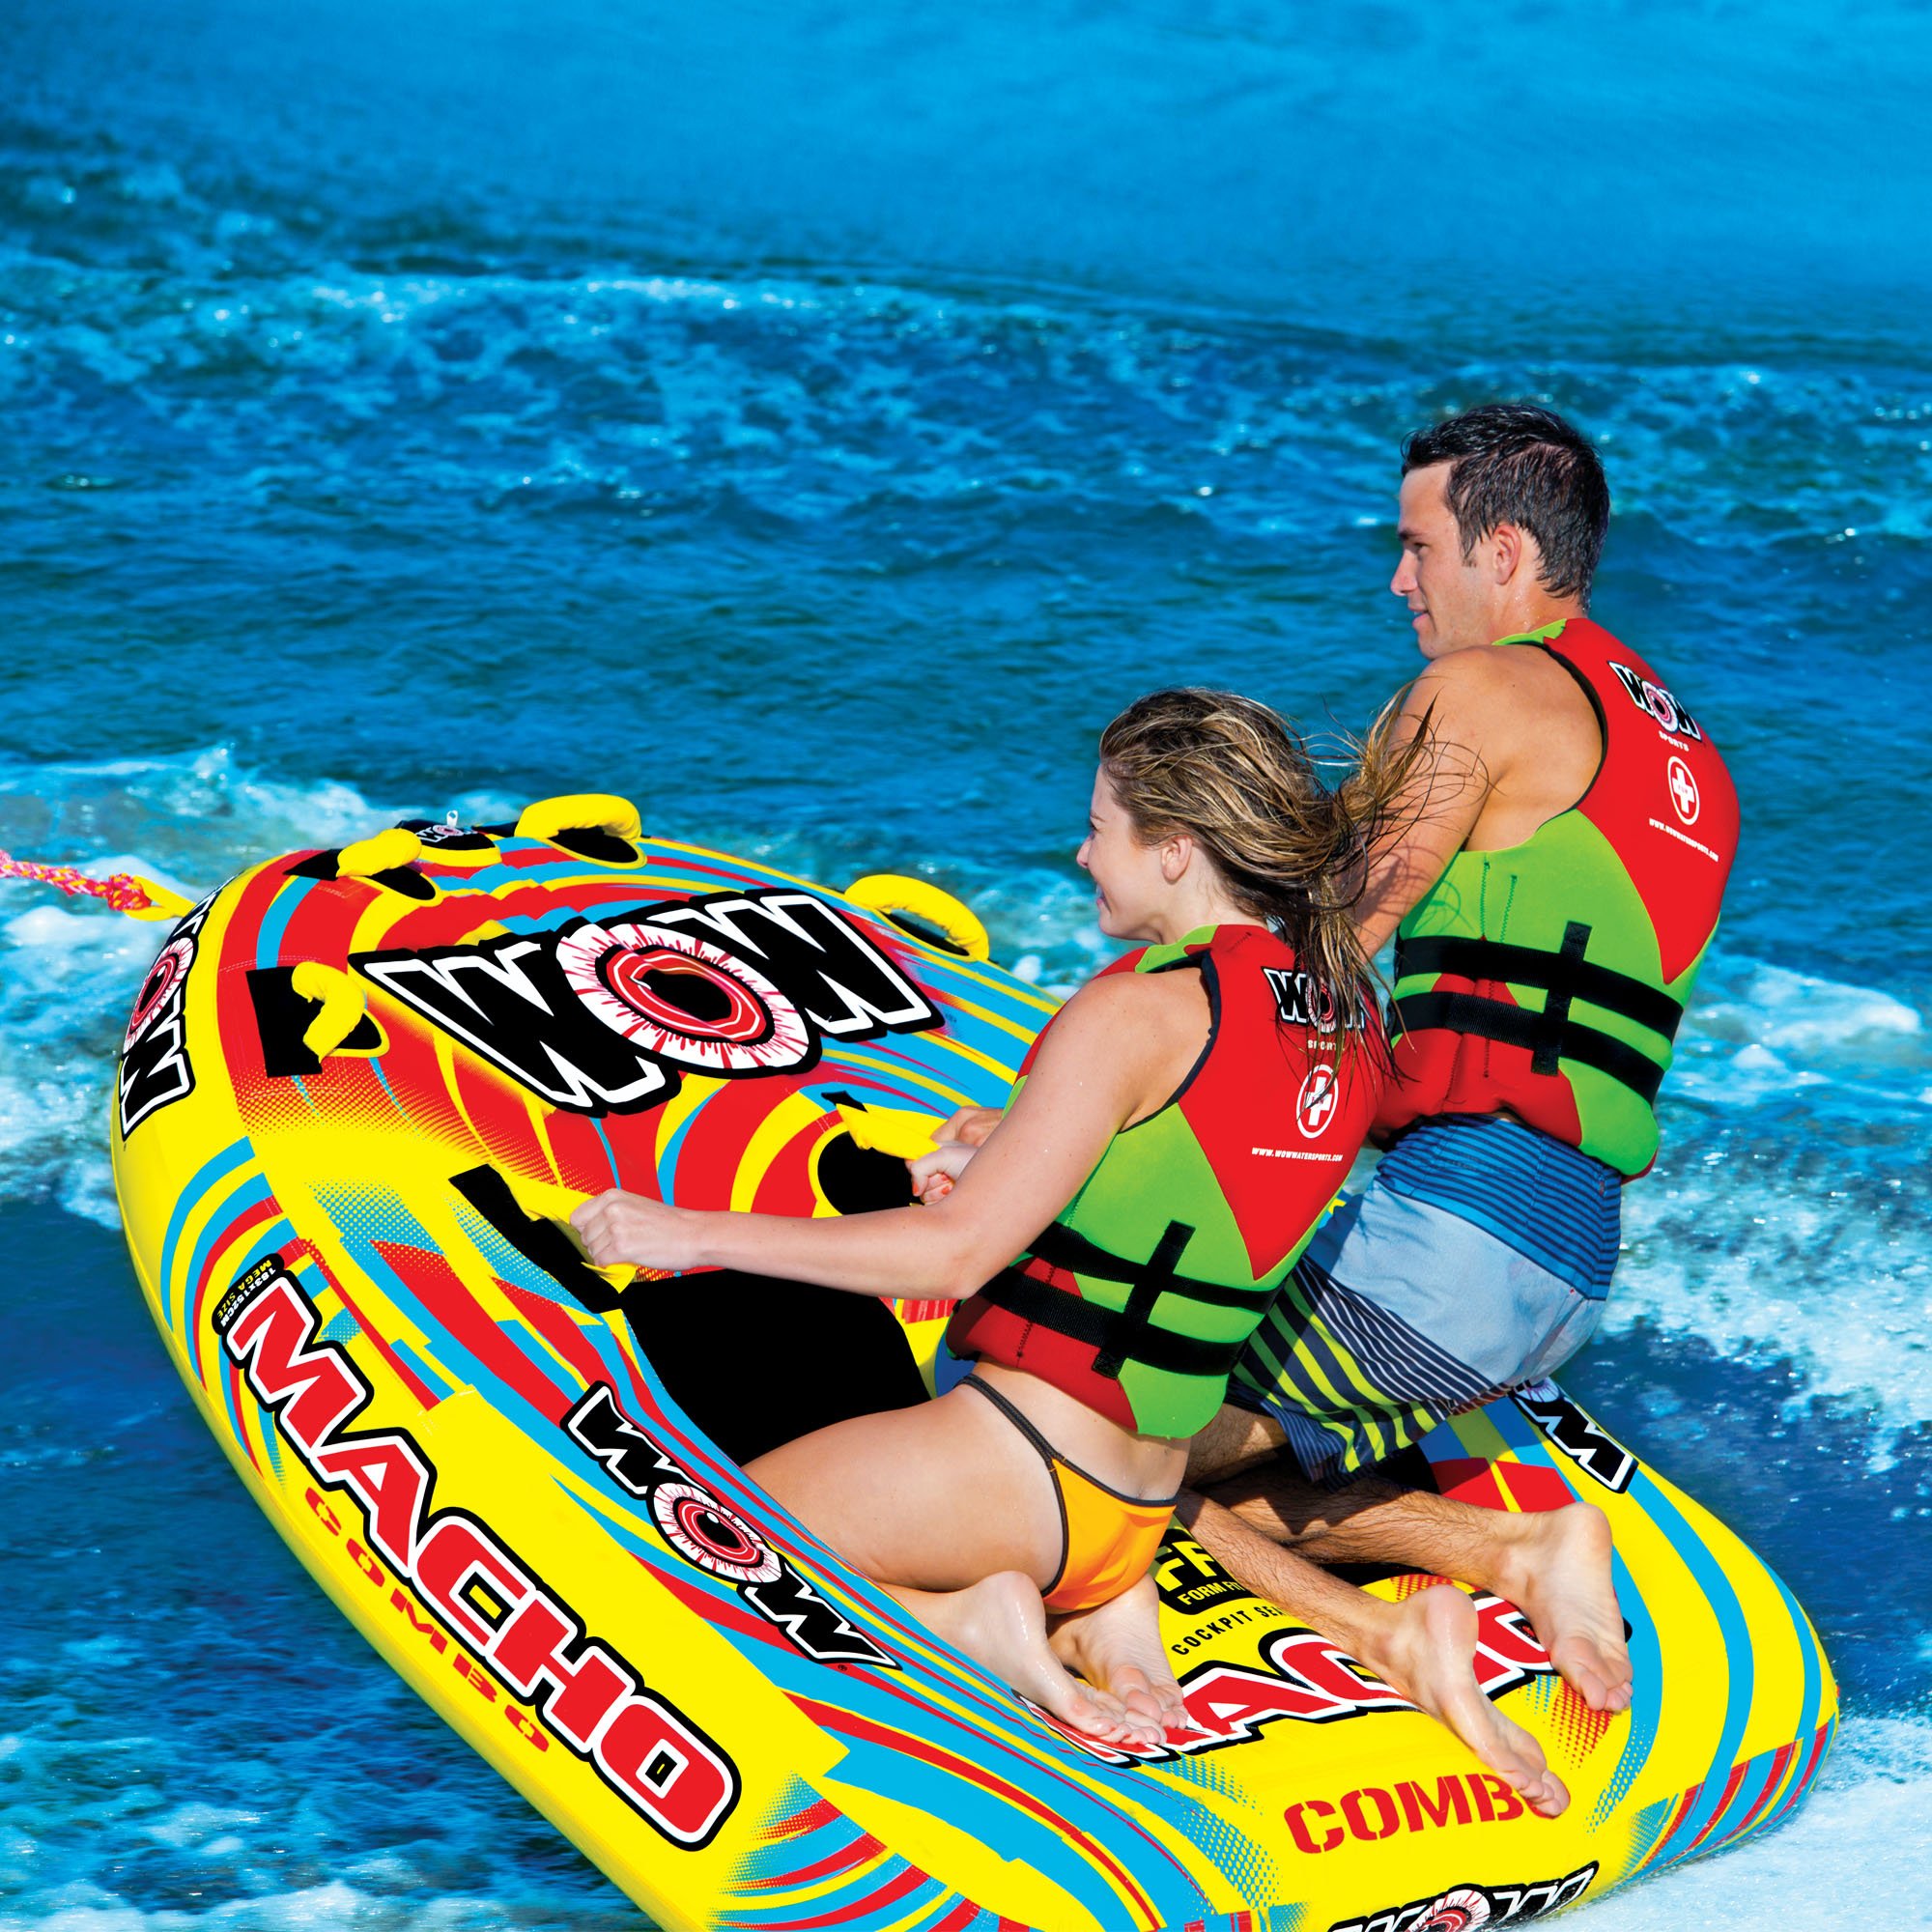 WOW Sports Macho Towable Tube for Boating 2 - 3 Person Options